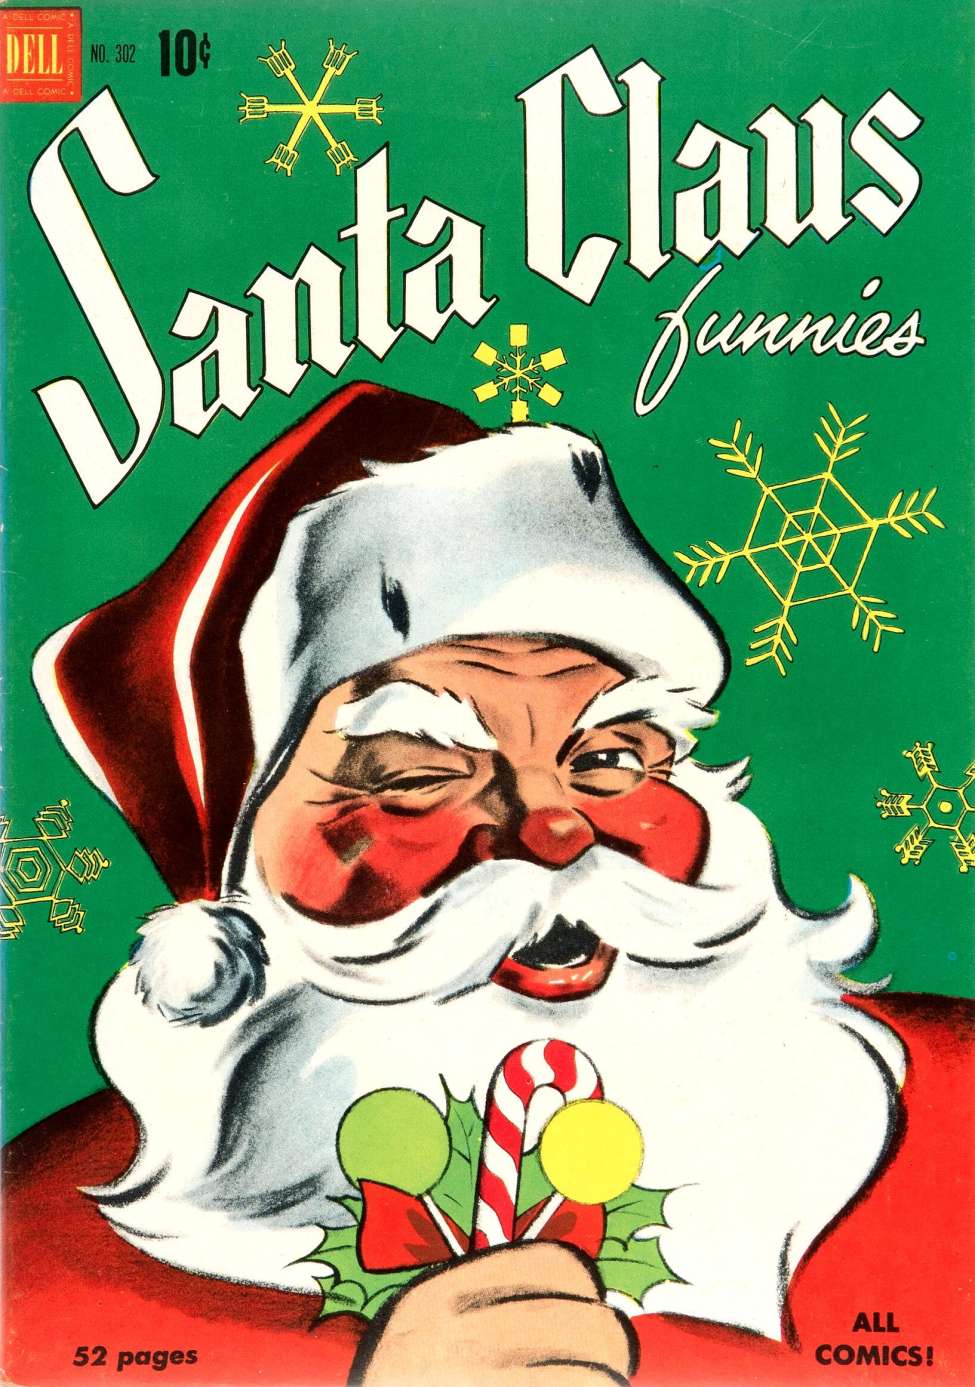 Book Cover For 0302 - Santa Claus Funnies - Version 2